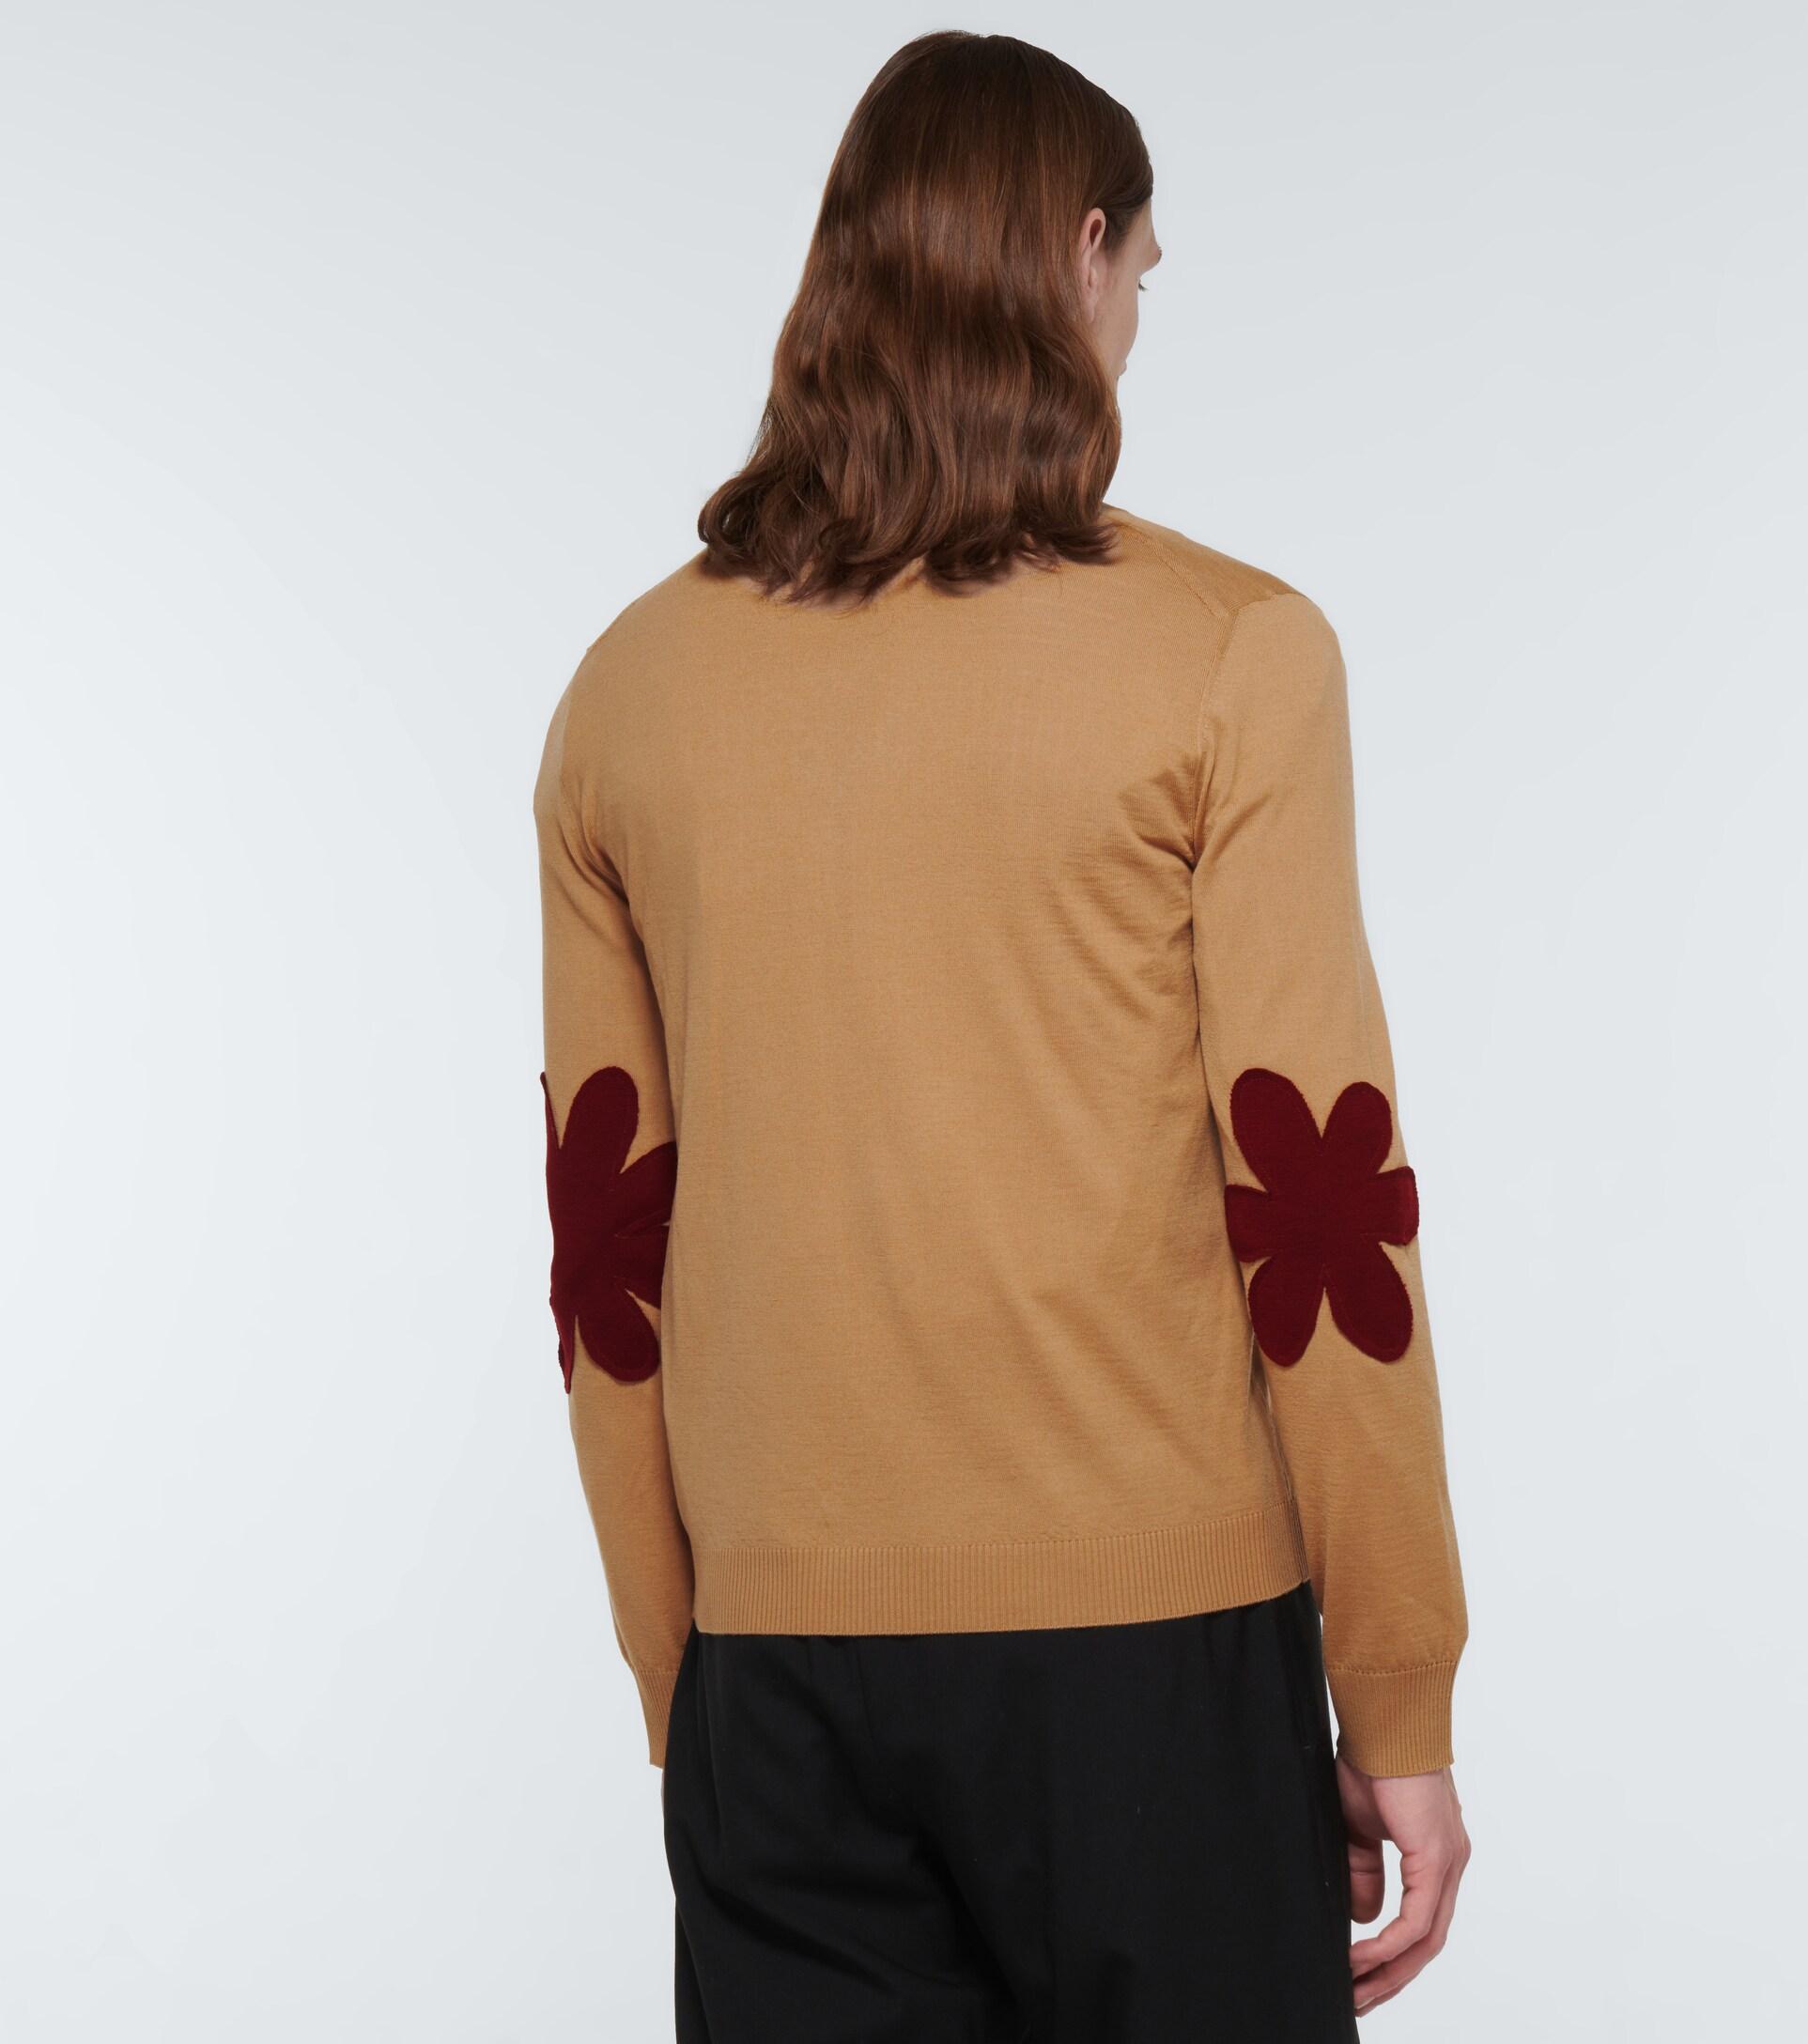 Marni Flower-patch Wool Cardigan for Men